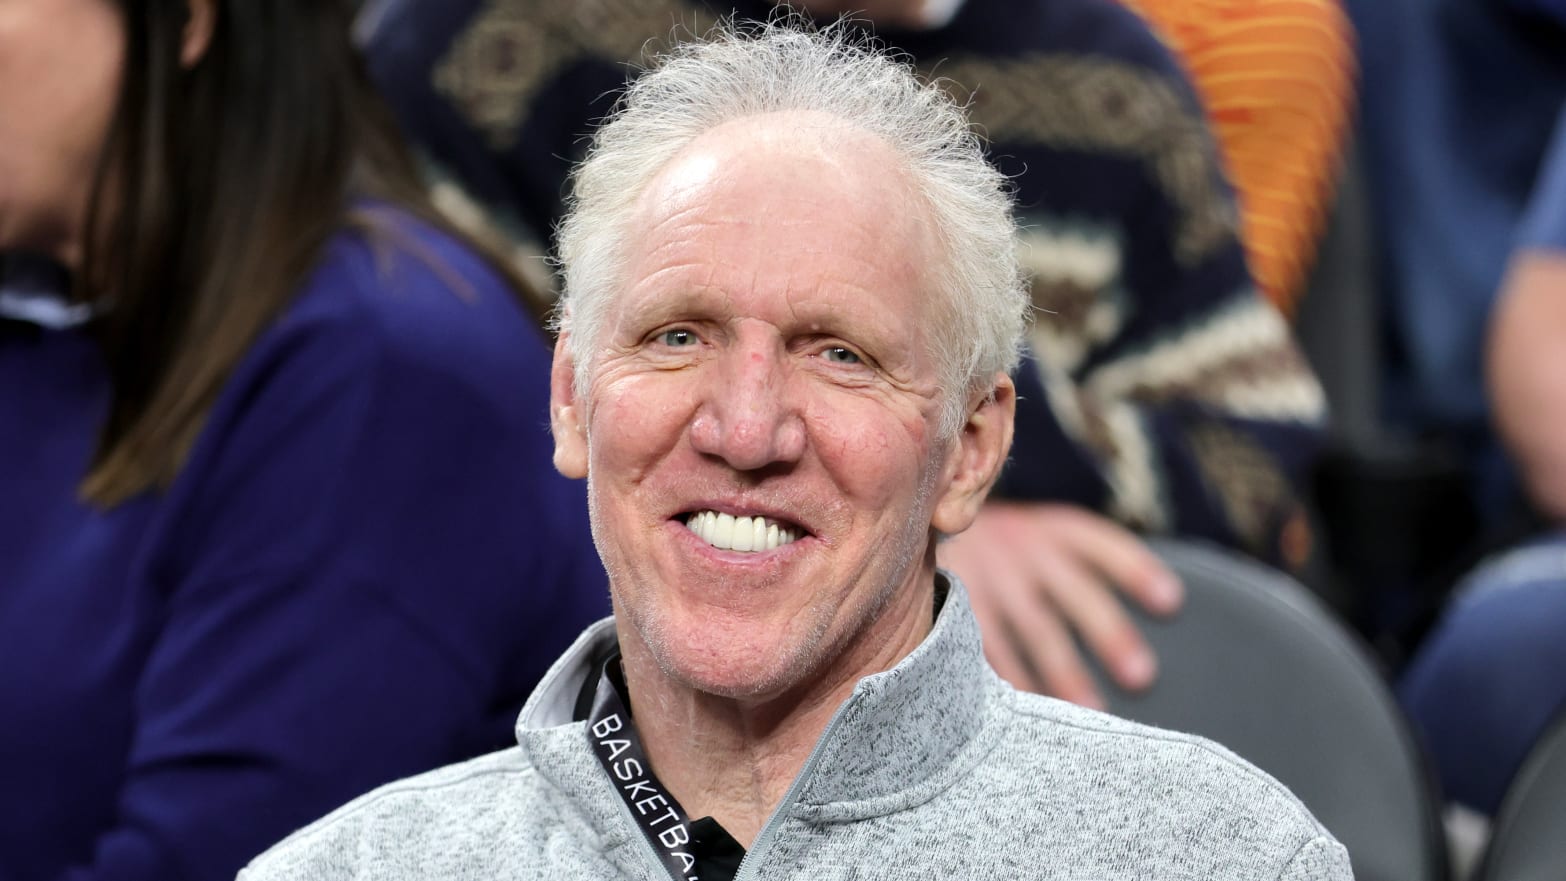 Sportscaster and former NBA player Bill Walton attends a game between the USC Trojans and the UCLA Bruins on March 11, 2022, in Las Vegas.